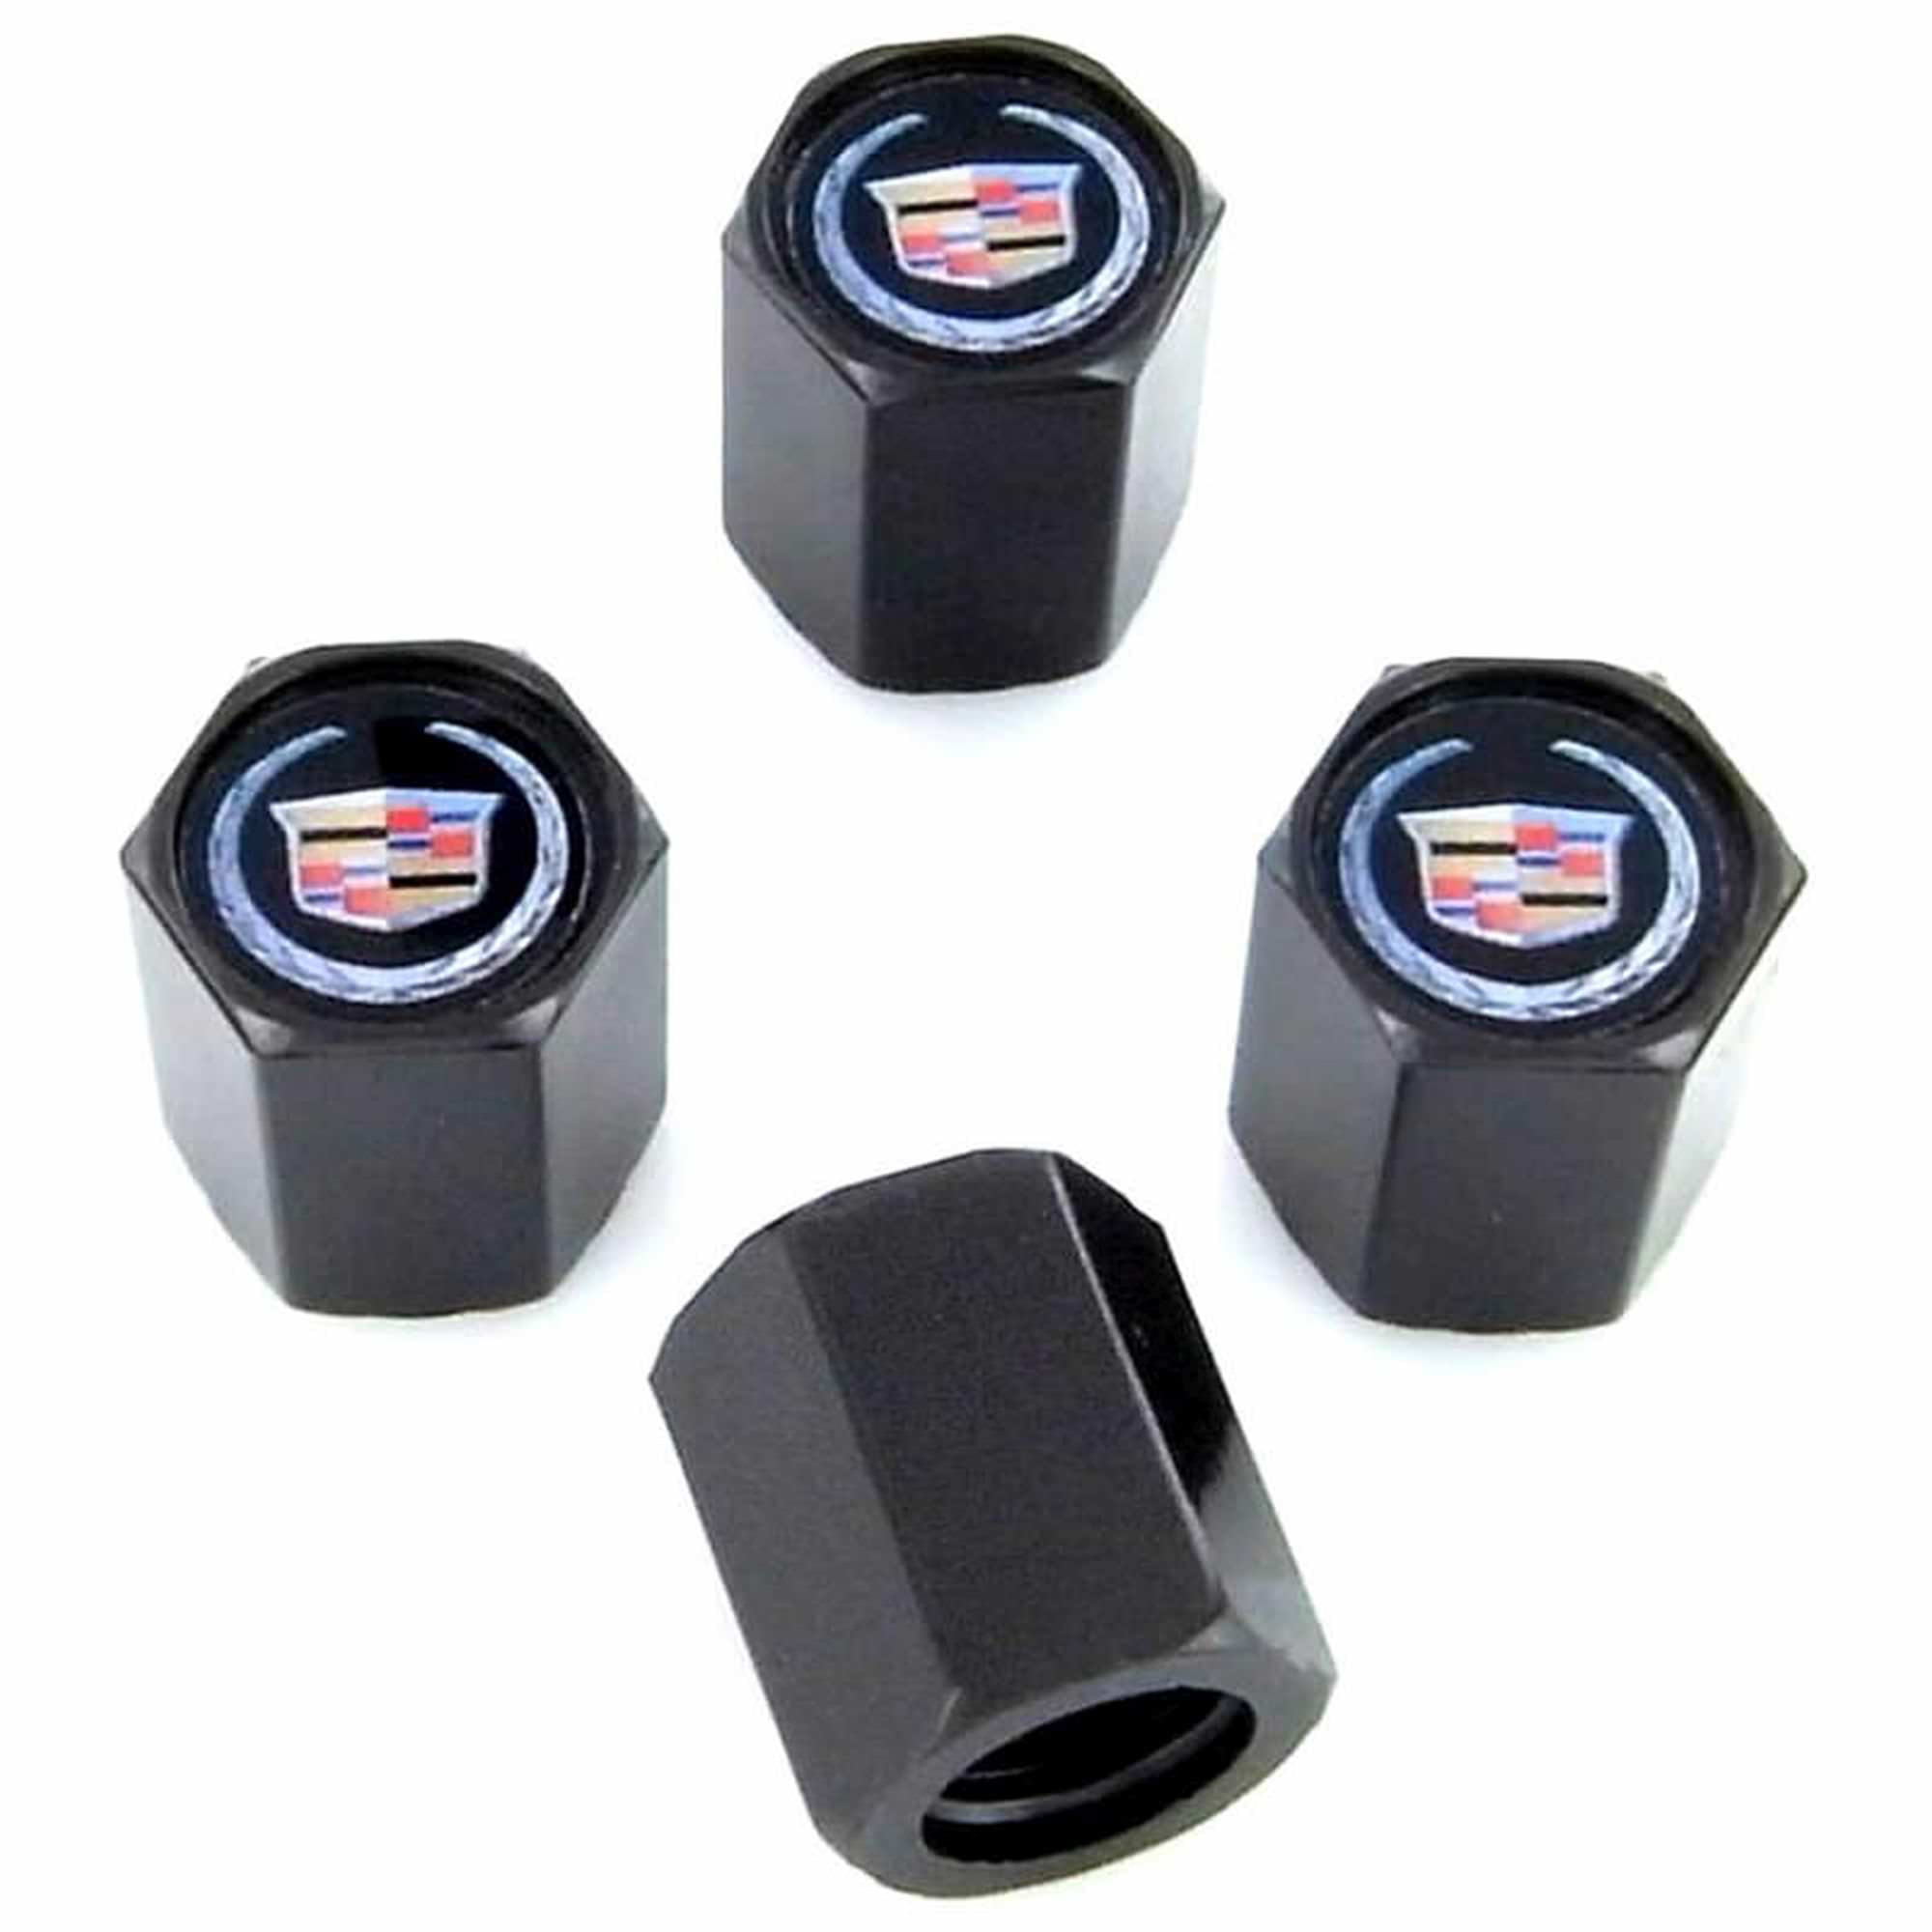 for Cadillac Black and Silver Valve for Cadillac Valve stem caps Accessories，Black Silver Valve 